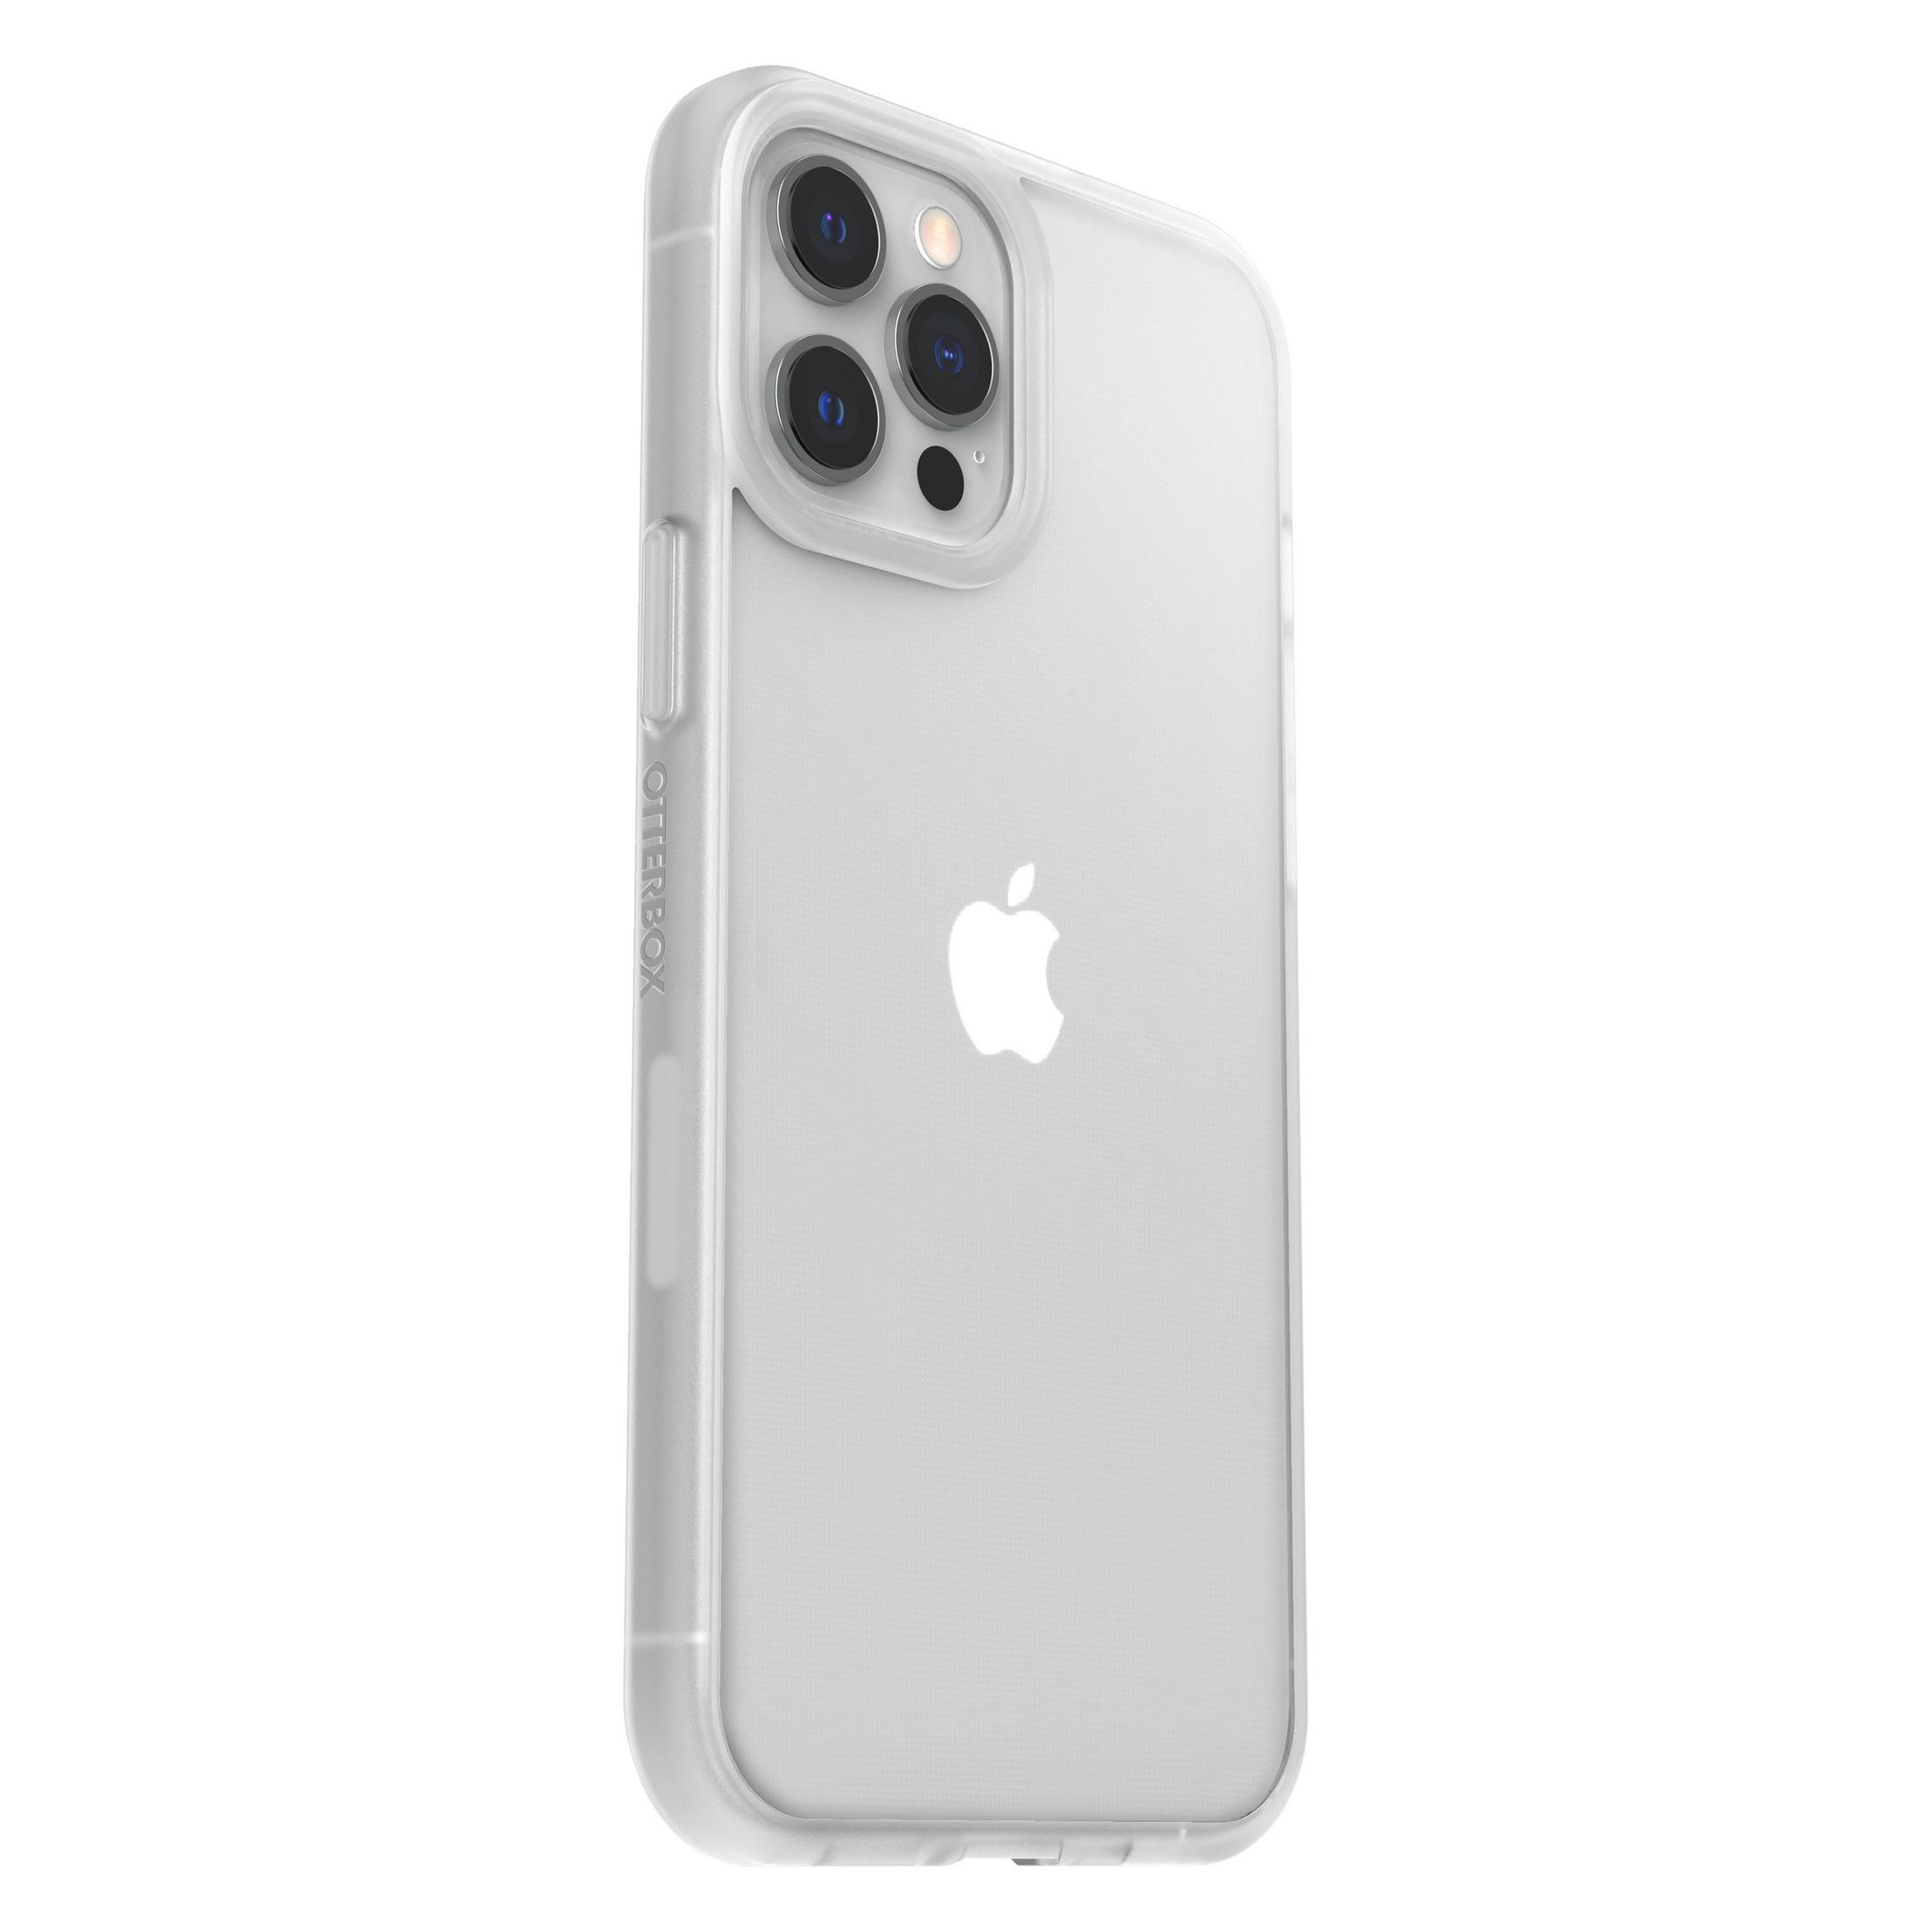 PRO Apple, Backcover, Pro REACT 12 iPhone OTTERBOX Transparent 77-65279 CLEAR, 12 MAX Max, IP